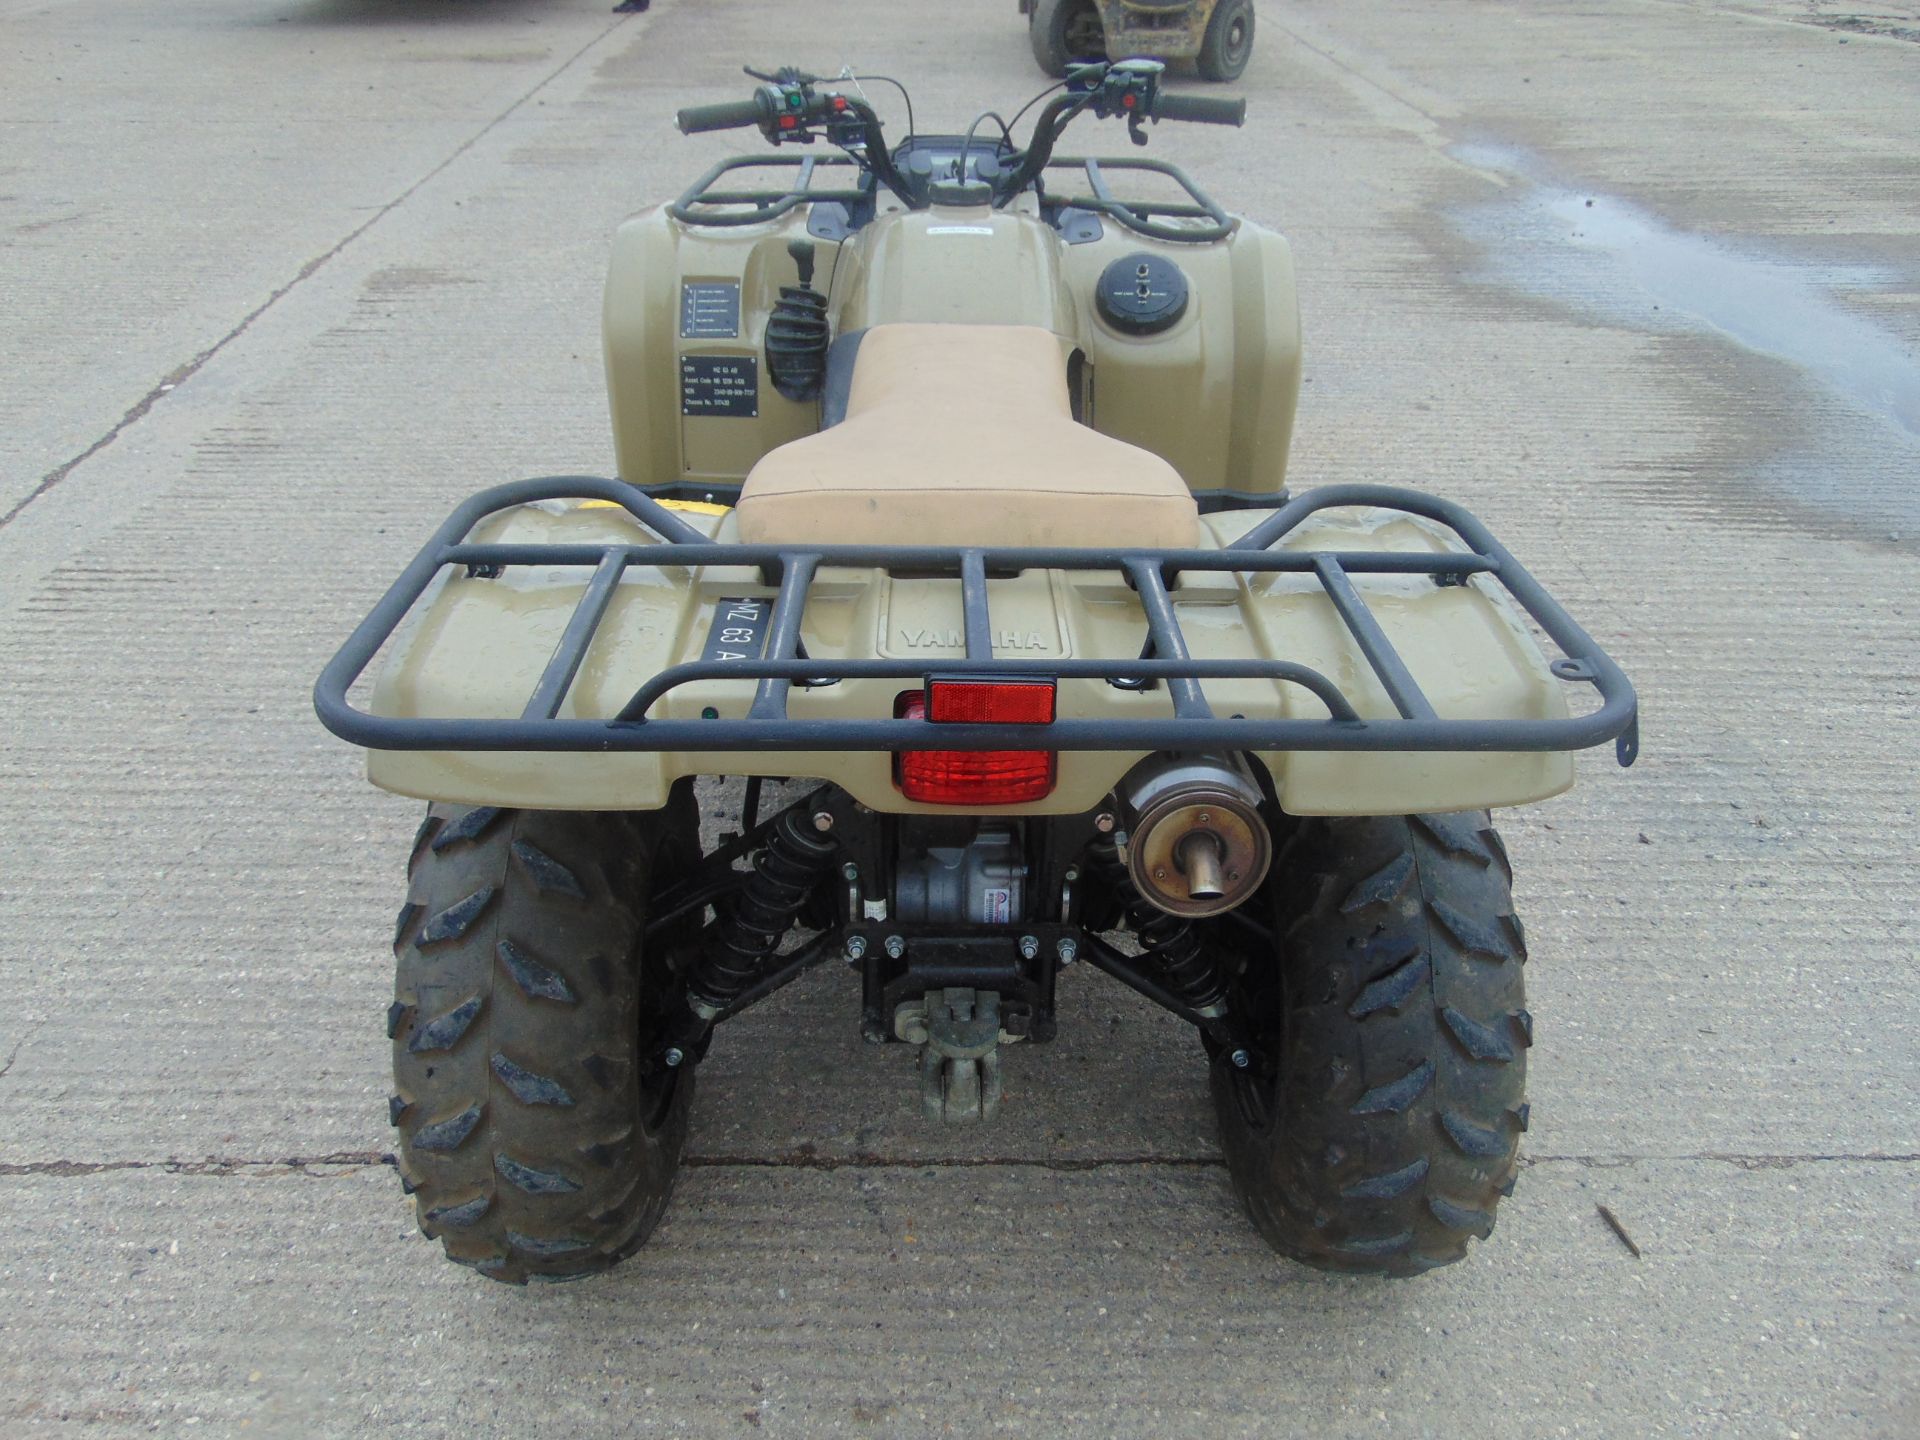 Military Specification Yamaha Grizzly 450 4 x 4 ATV Quad Bike - Image 6 of 19